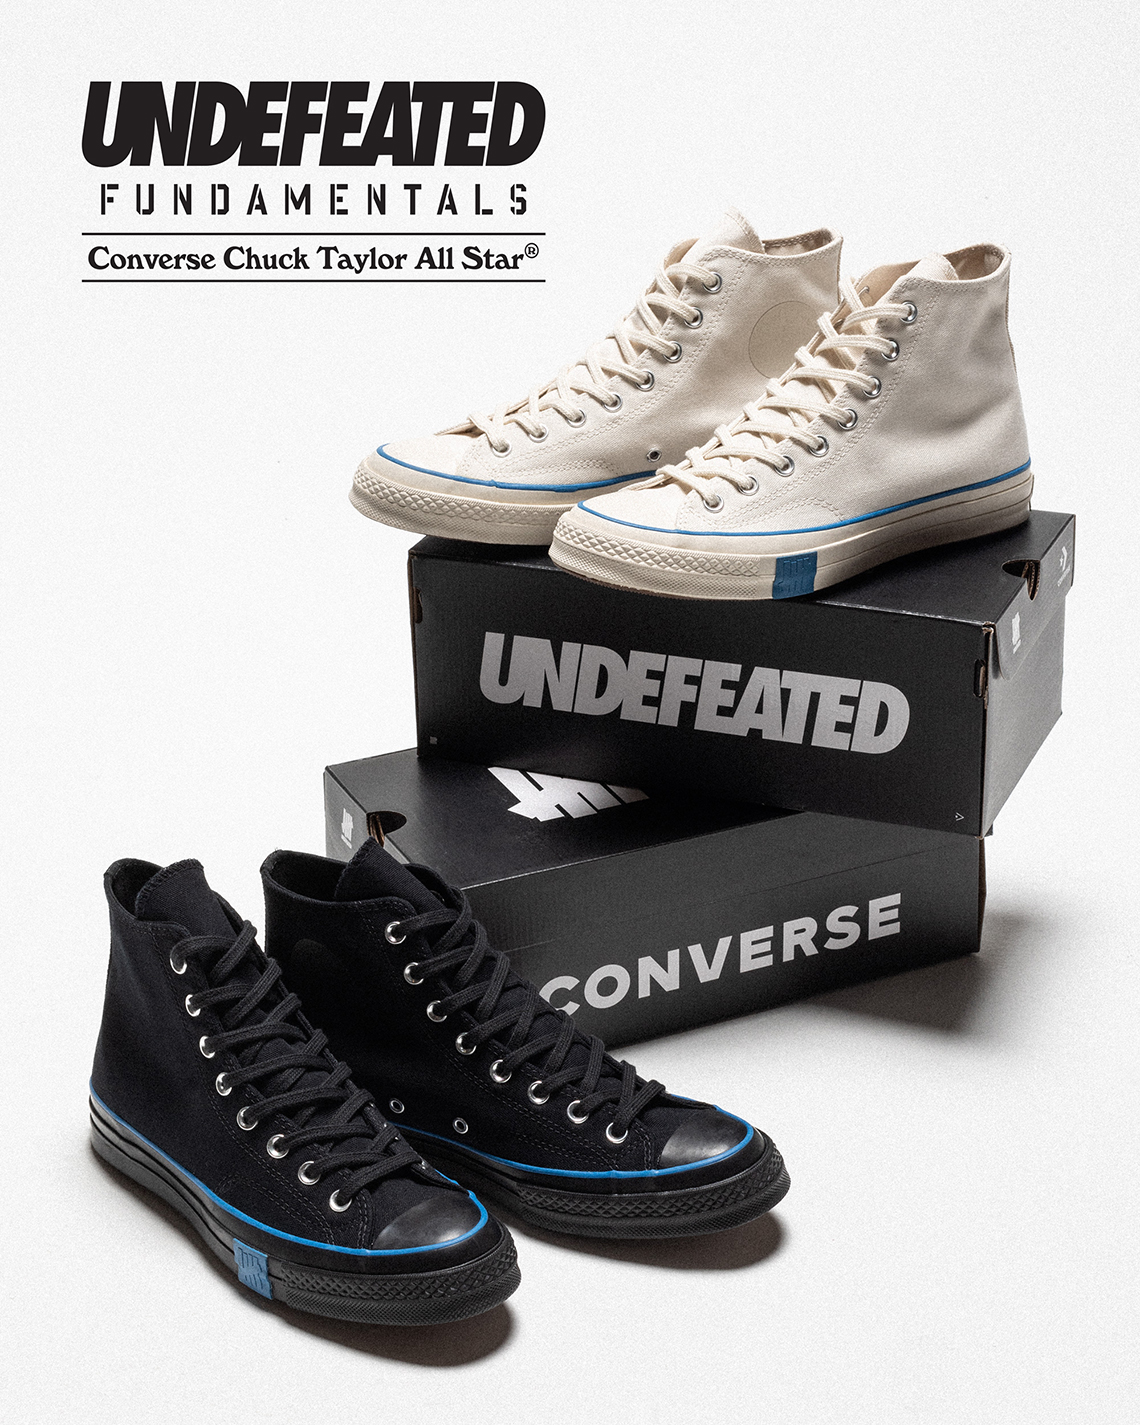 converse undefeated